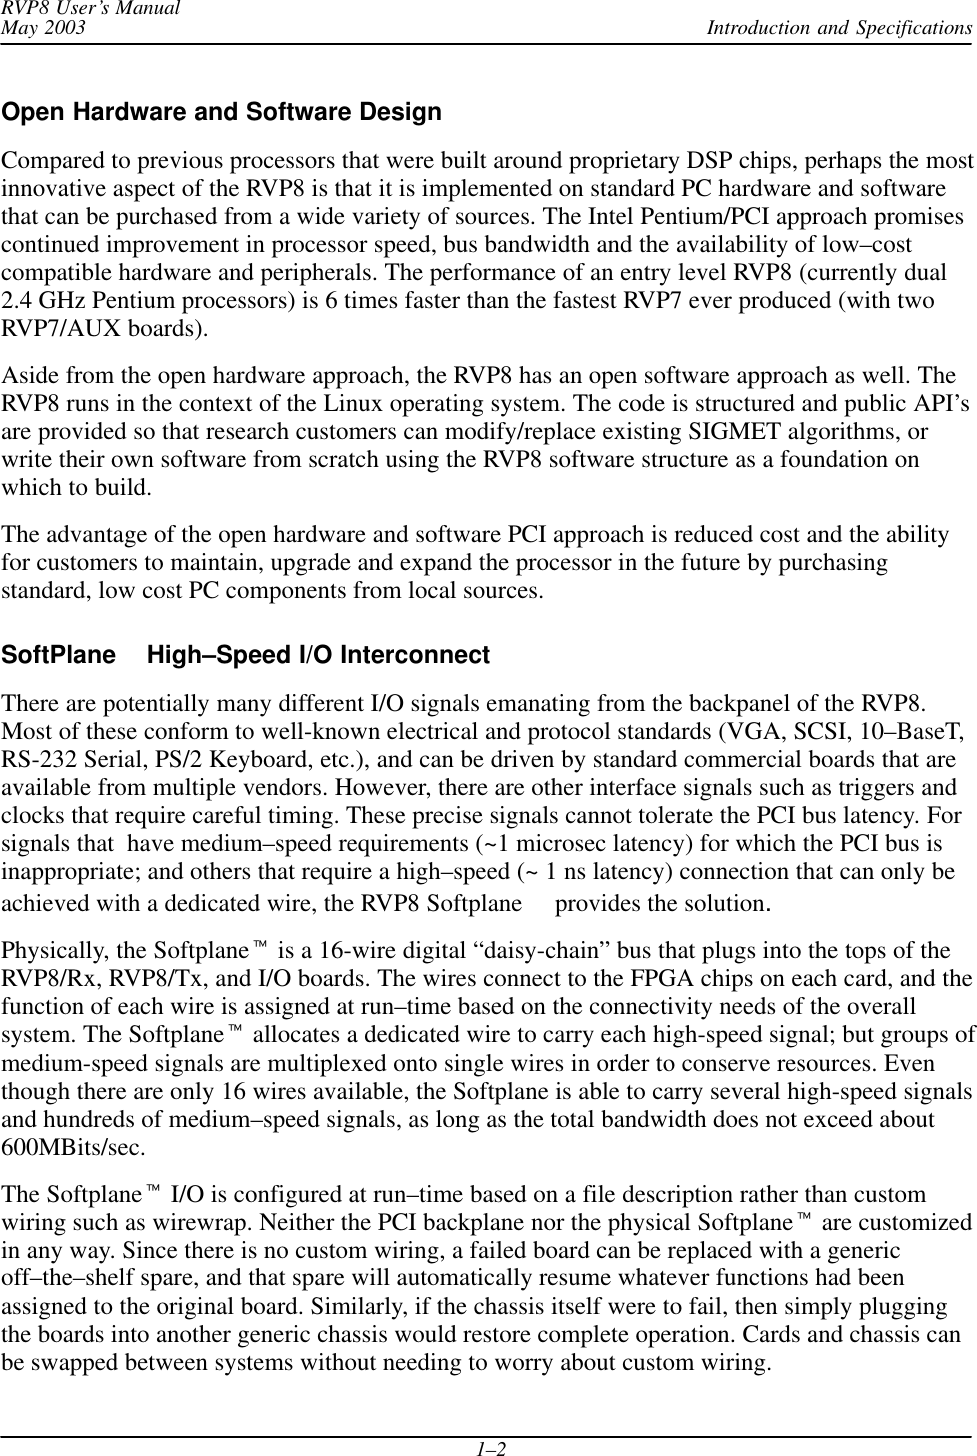 Introduction and SpecificationsRVP8 User’s ManualMay 20031–2Open Hardware and Software DesignCompared to previous processors that were built around proprietary DSP chips, perhaps the mostinnovative aspect of the RVP8 is that it is implemented on standard PC hardware and softwarethat can be purchased from a wide variety of sources. The Intel Pentium/PCI approach promisescontinued improvement in processor speed, bus bandwidth and the availability of low–costcompatible hardware and peripherals. The performance of an entry level RVP8 (currently dual2.4 GHz Pentium processors) is 6 times faster than the fastest RVP7 ever produced (with twoRVP7/AUX boards).Aside from the open hardware approach, the RVP8 has an open software approach as well. TheRVP8 runs in the context of the Linux operating system. The code is structured and public API’sare provided so that research customers can modify/replace existing SIGMET algorithms, orwrite their own software from scratch using the RVP8 software structure as a foundation onwhich to build.The advantage of the open hardware and software PCI approach is reduced cost and the abilityfor customers to maintain, upgrade and expand the processor in the future by purchasingstandard, low cost PC components from local sources.SoftPlane  High–Speed I/O InterconnectThere are potentially many different I/O signals emanating from the backpanel of the RVP8.Most of these conform to well-known electrical and protocol standards (VGA, SCSI, 10–BaseT,RS-232 Serial, PS/2 Keyboard, etc.), and can be driven by standard commercial boards that areavailable from multiple vendors. However, there are other interface signals such as triggers andclocks that require careful timing. These precise signals cannot tolerate the PCI bus latency. Forsignals that  have medium–speed requirements (~1 microsec latency) for which the PCI bus isinappropriate; and others that require a high–speed (~ 1 ns latency) connection that can only beachieved with a dedicated wire, the RVP8 Softplane  provides the solution.Physically, the Softplane is a 16-wire digital “daisy-chain” bus that plugs into the tops of theRVP8/Rx, RVP8/Tx, and I/O boards. The wires connect to the FPGA chips on each card, and thefunction of each wire is assigned at run–time based on the connectivity needs of the overallsystem. The Softplane allocates a dedicated wire to carry each high-speed signal; but groups ofmedium-speed signals are multiplexed onto single wires in order to conserve resources. Eventhough there are only 16 wires available, the Softplane is able to carry several high-speed signalsand hundreds of medium–speed signals, as long as the total bandwidth does not exceed about600MBits/sec.The Softplane I/O is configured at run–time based on a file description rather than customwiring such as wirewrap. Neither the PCI backplane nor the physical Softplane are customizedin any way. Since there is no custom wiring, a failed board can be replaced with a genericoff–the–shelf spare, and that spare will automatically resume whatever functions had beenassigned to the original board. Similarly, if the chassis itself were to fail, then simply pluggingthe boards into another generic chassis would restore complete operation. Cards and chassis canbe swapped between systems without needing to worry about custom wiring.